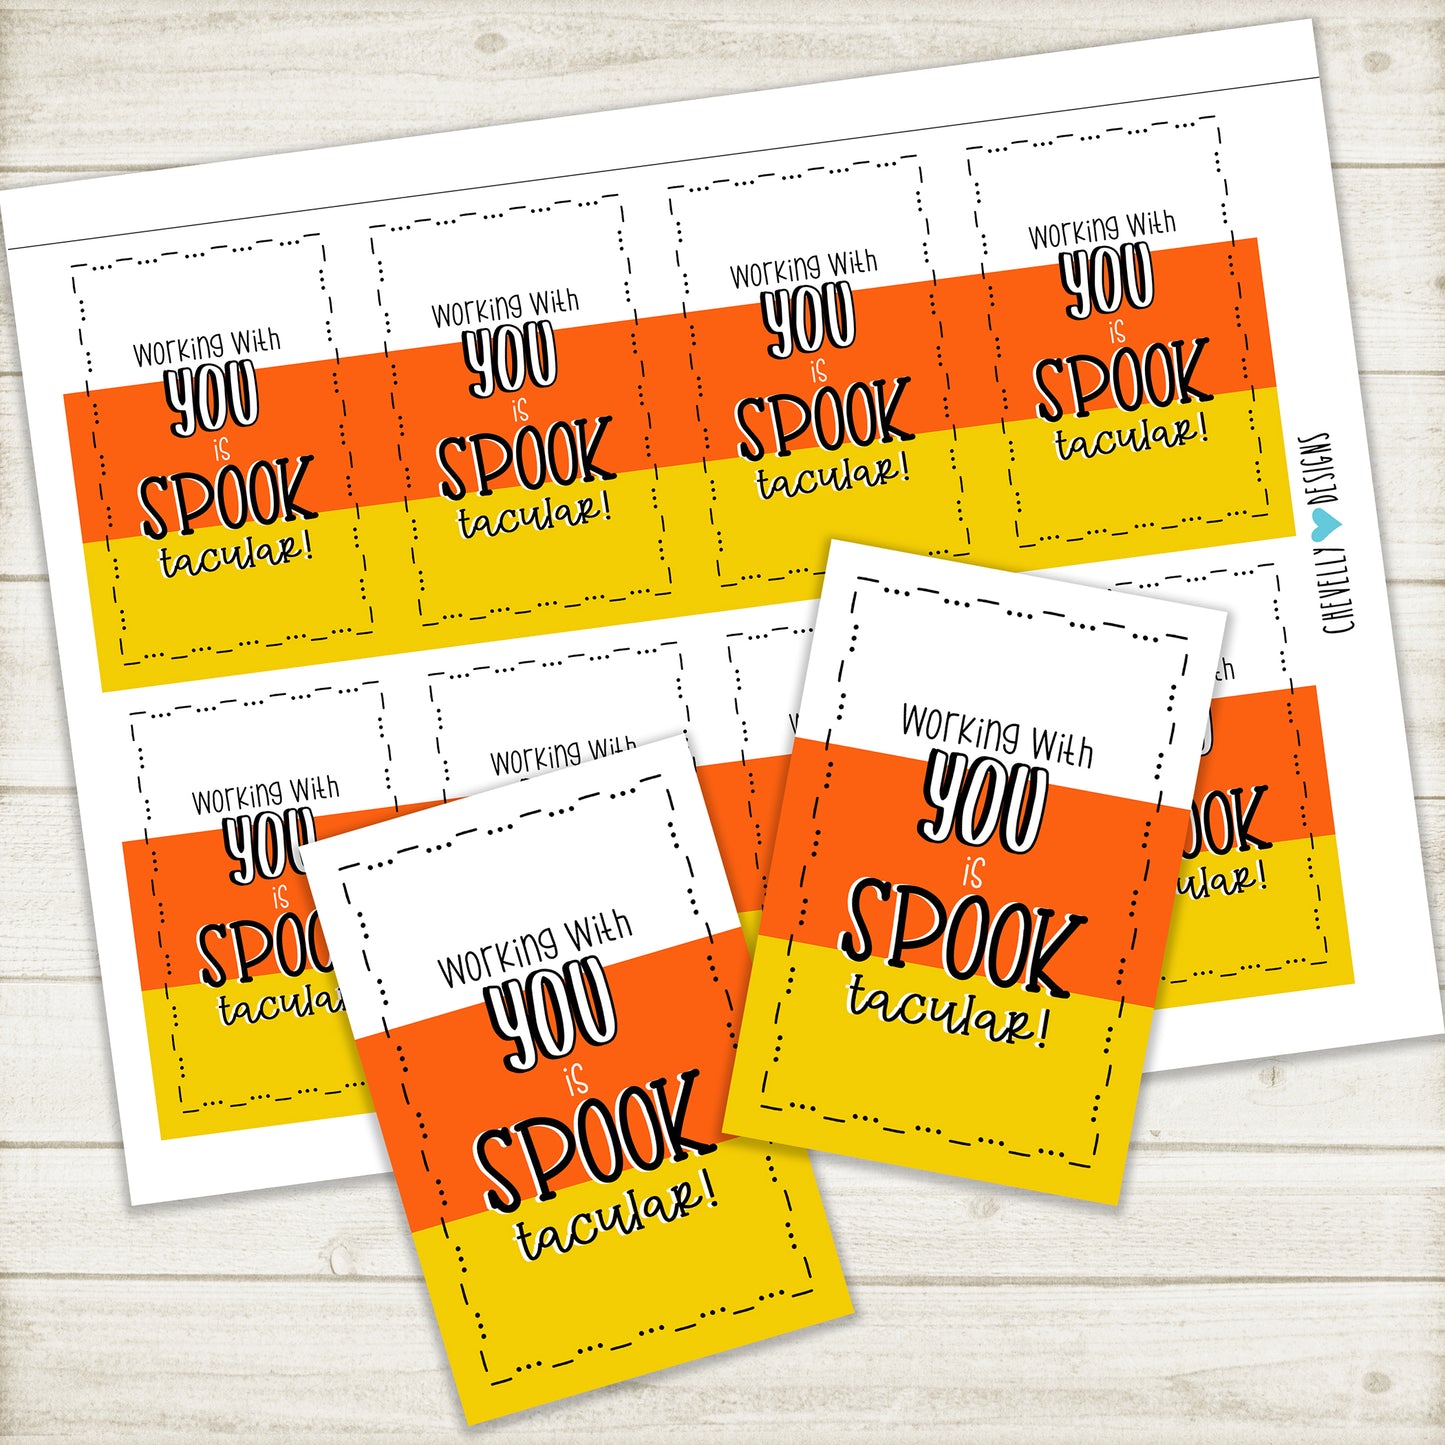 Instant Digital Download - Printable Candy Corn Gift Tags for Halloween - Working with you is SPOOK-tacular